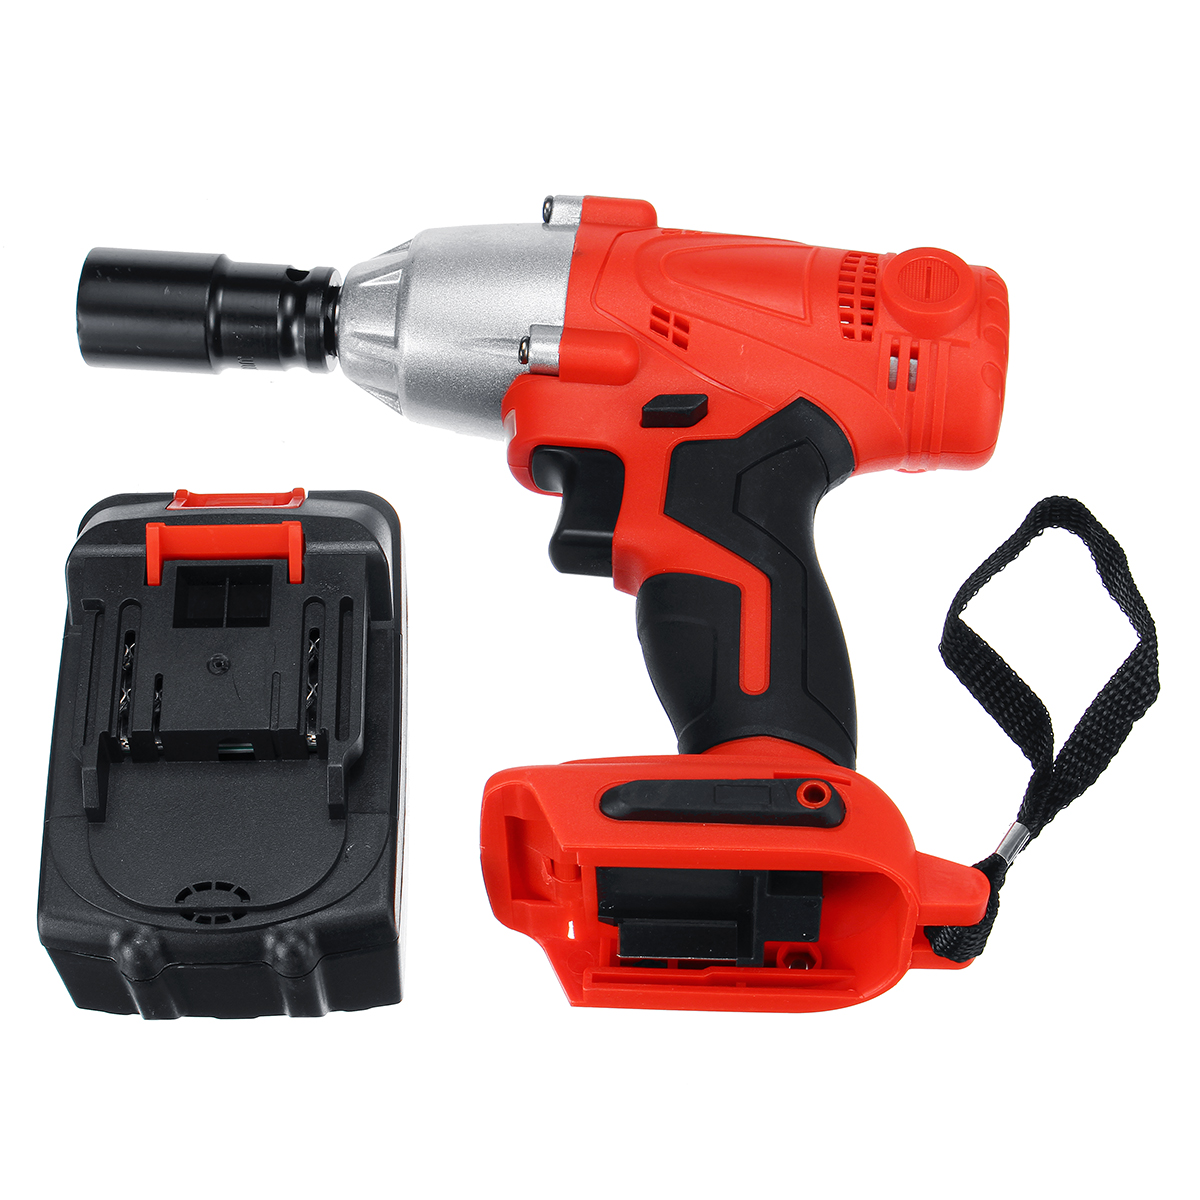 128VF188VF-Electric-Wrench-350Nm-High-Torque-Impact-Wrench-Cordless-12-Batteries-1-Charger-1431843-8